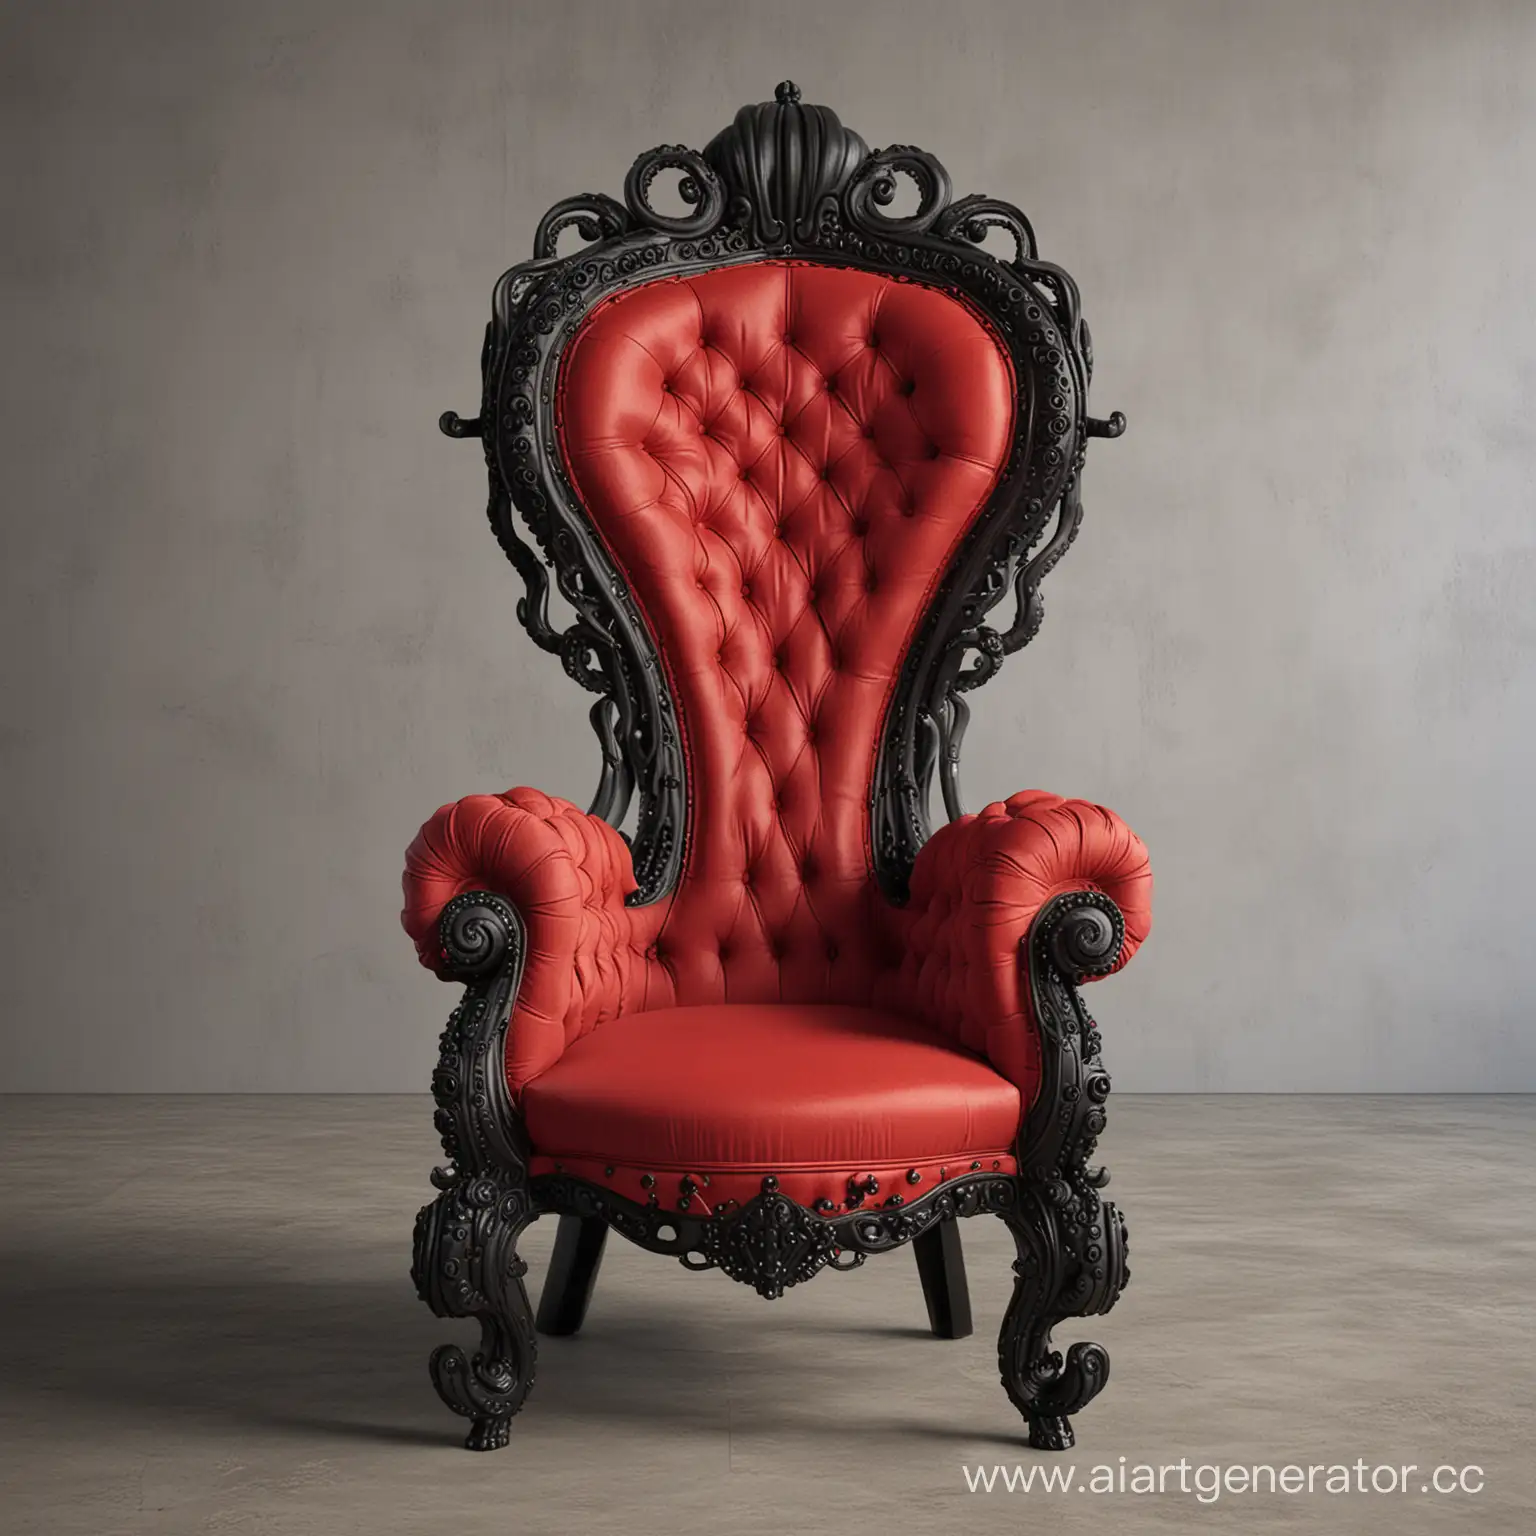 red upholstery,tentacle-shaped legs,throne with black legs,big